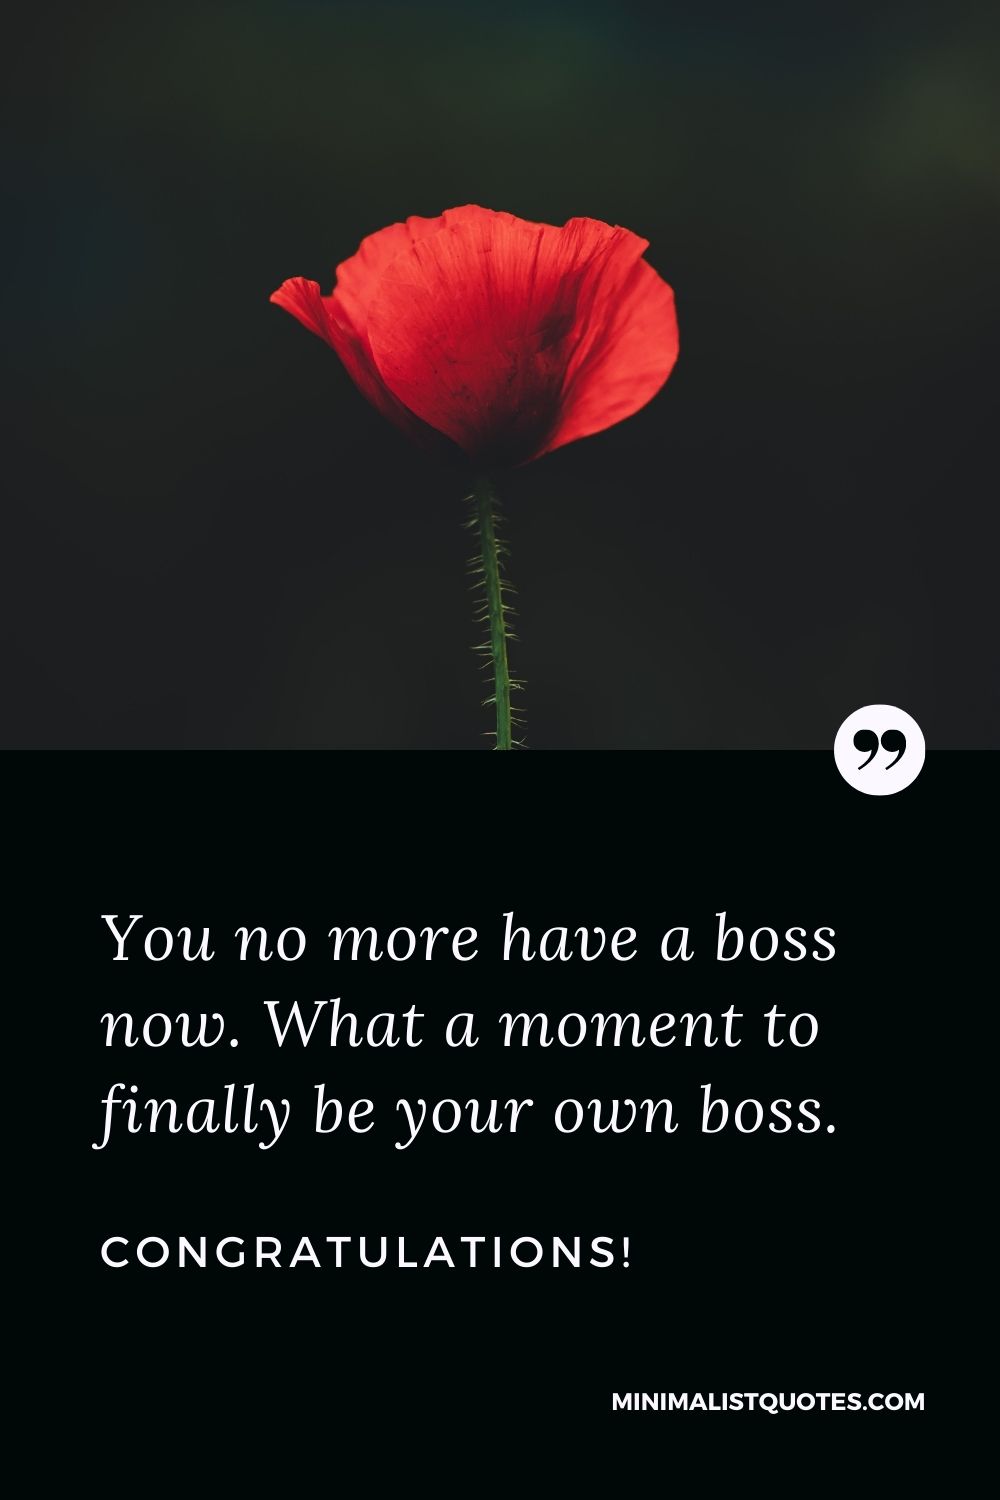 Retirement Wish, Quote & Message with Image: You no more have a boss now. What a moment to finally be your own boss. Congratulations!